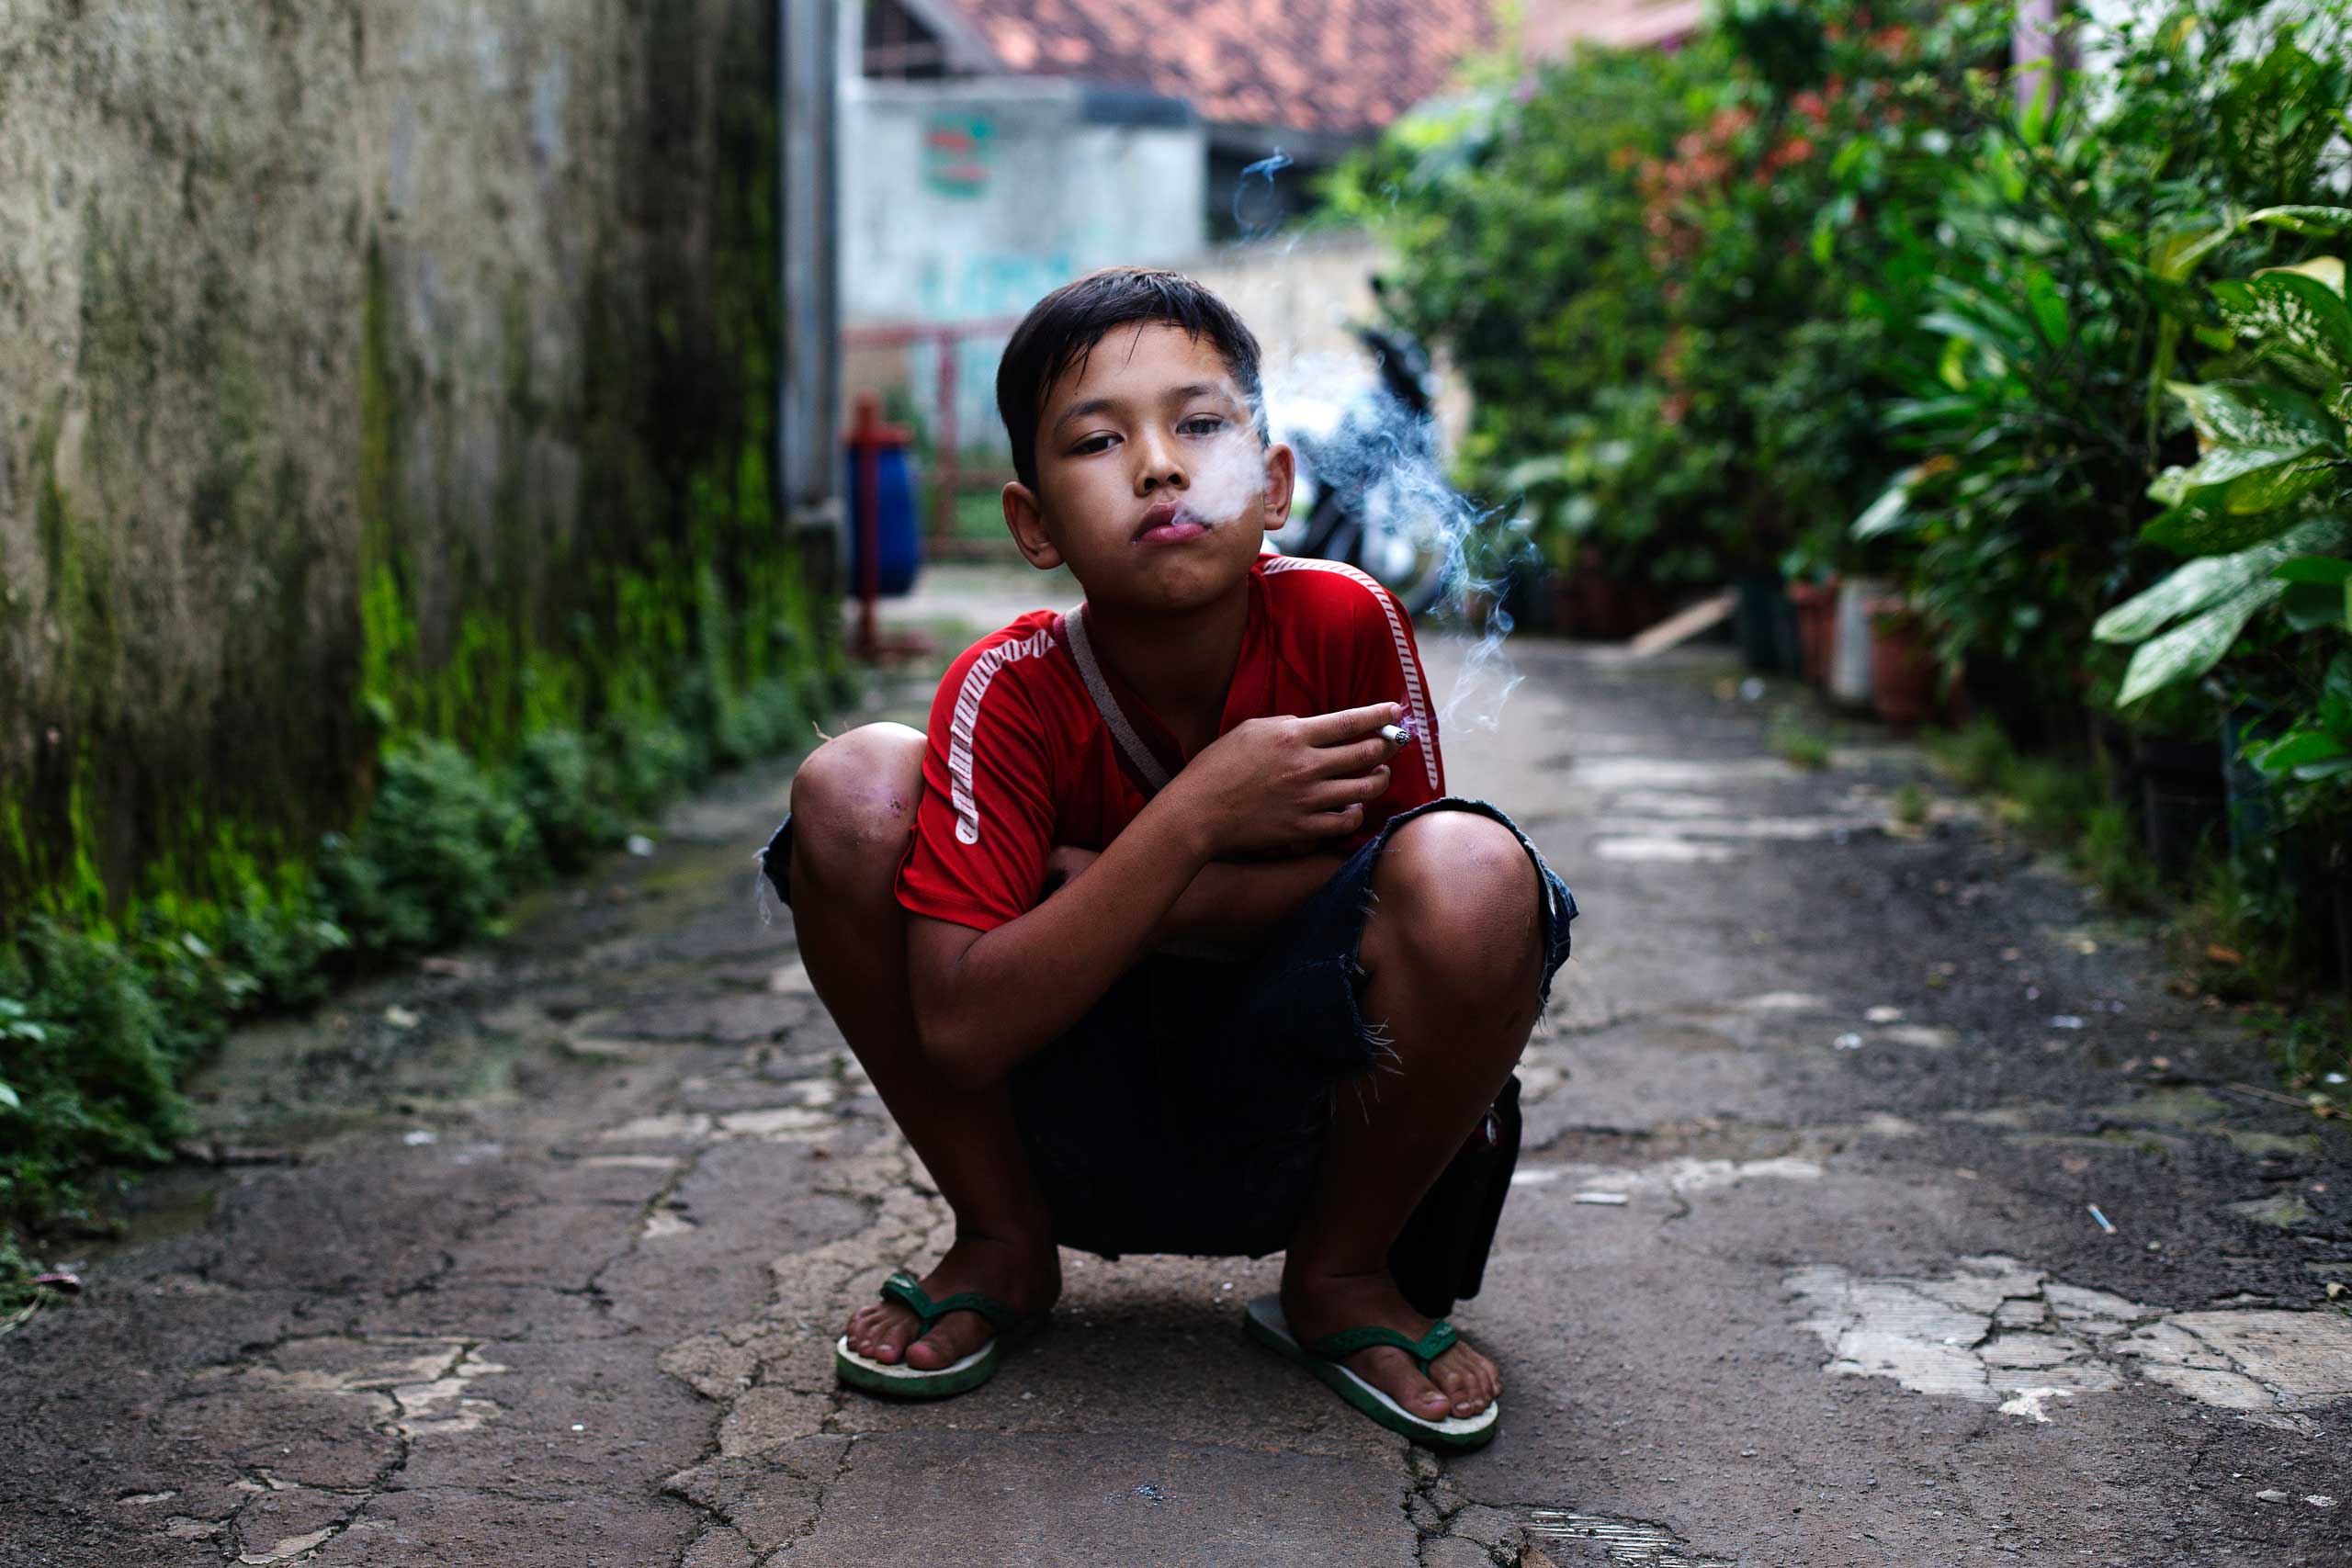 Rian, who smokes occasionally, poses for a photo as he smokes a cigarette in east Jakarta, Indonesia on February 12, 2014.